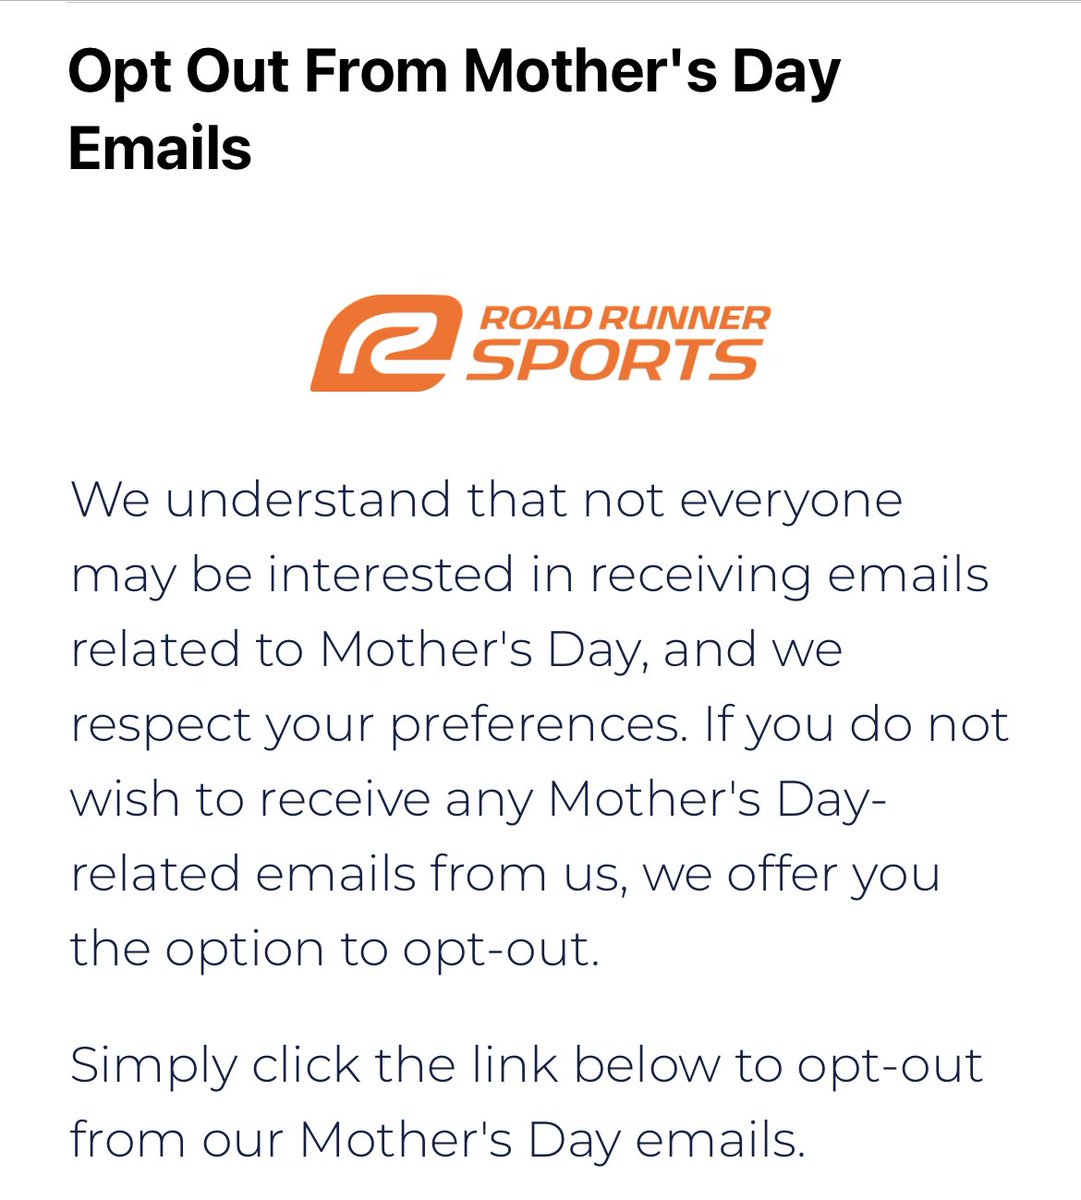 What a thoughtful email from @RRSports. I wish more retailers did this. I hate this time of year with all the Mother’s Day campaigns, makes me miss my mom even more :(